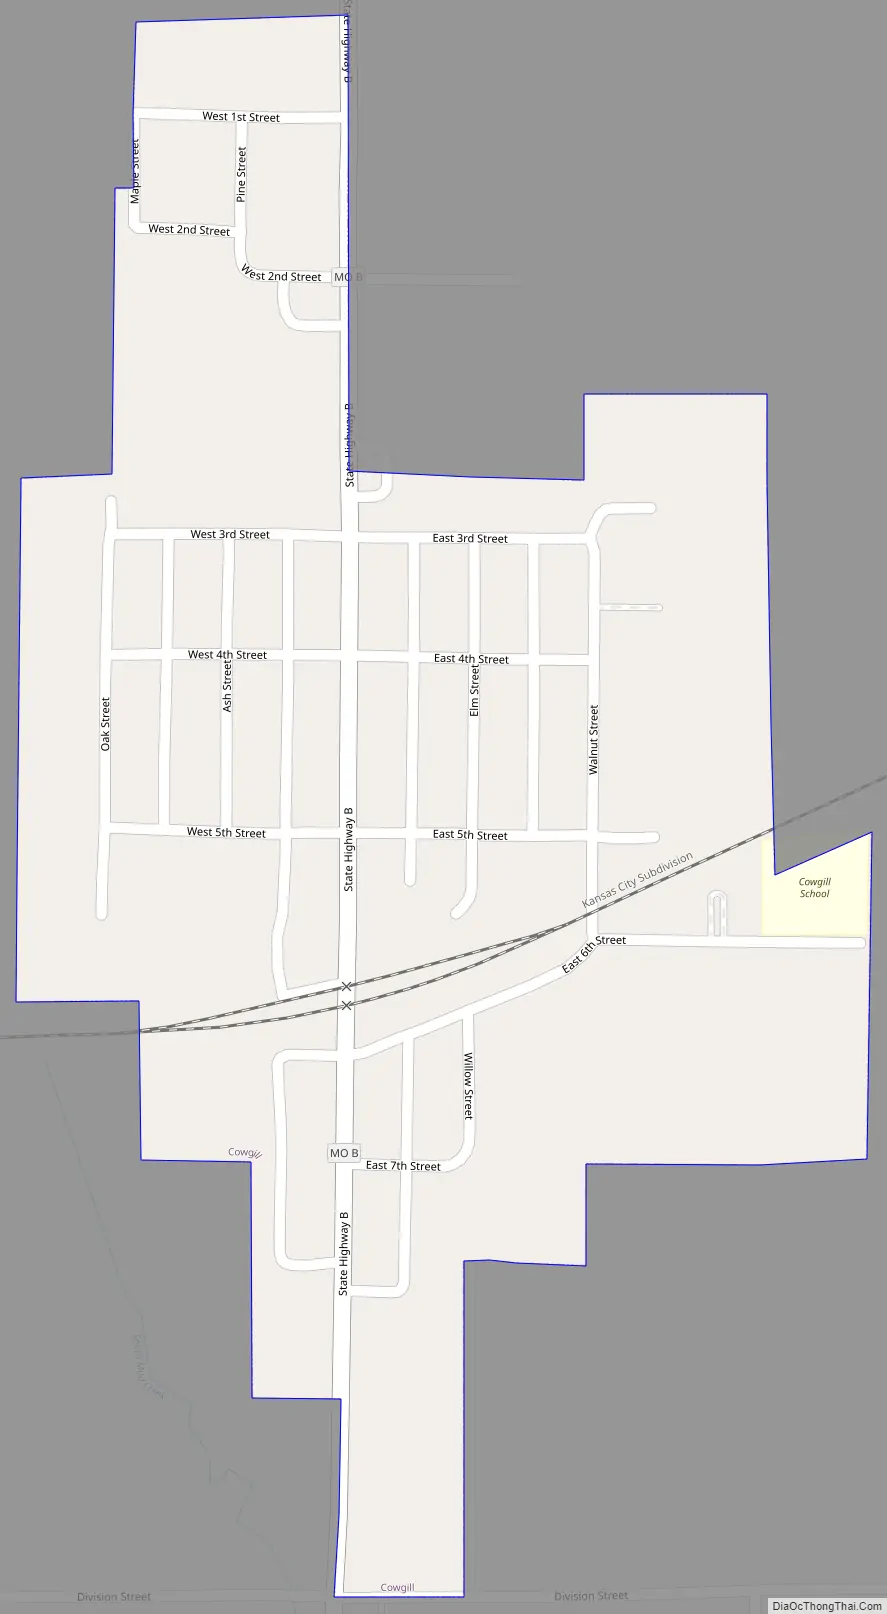 Map of Cowgill city